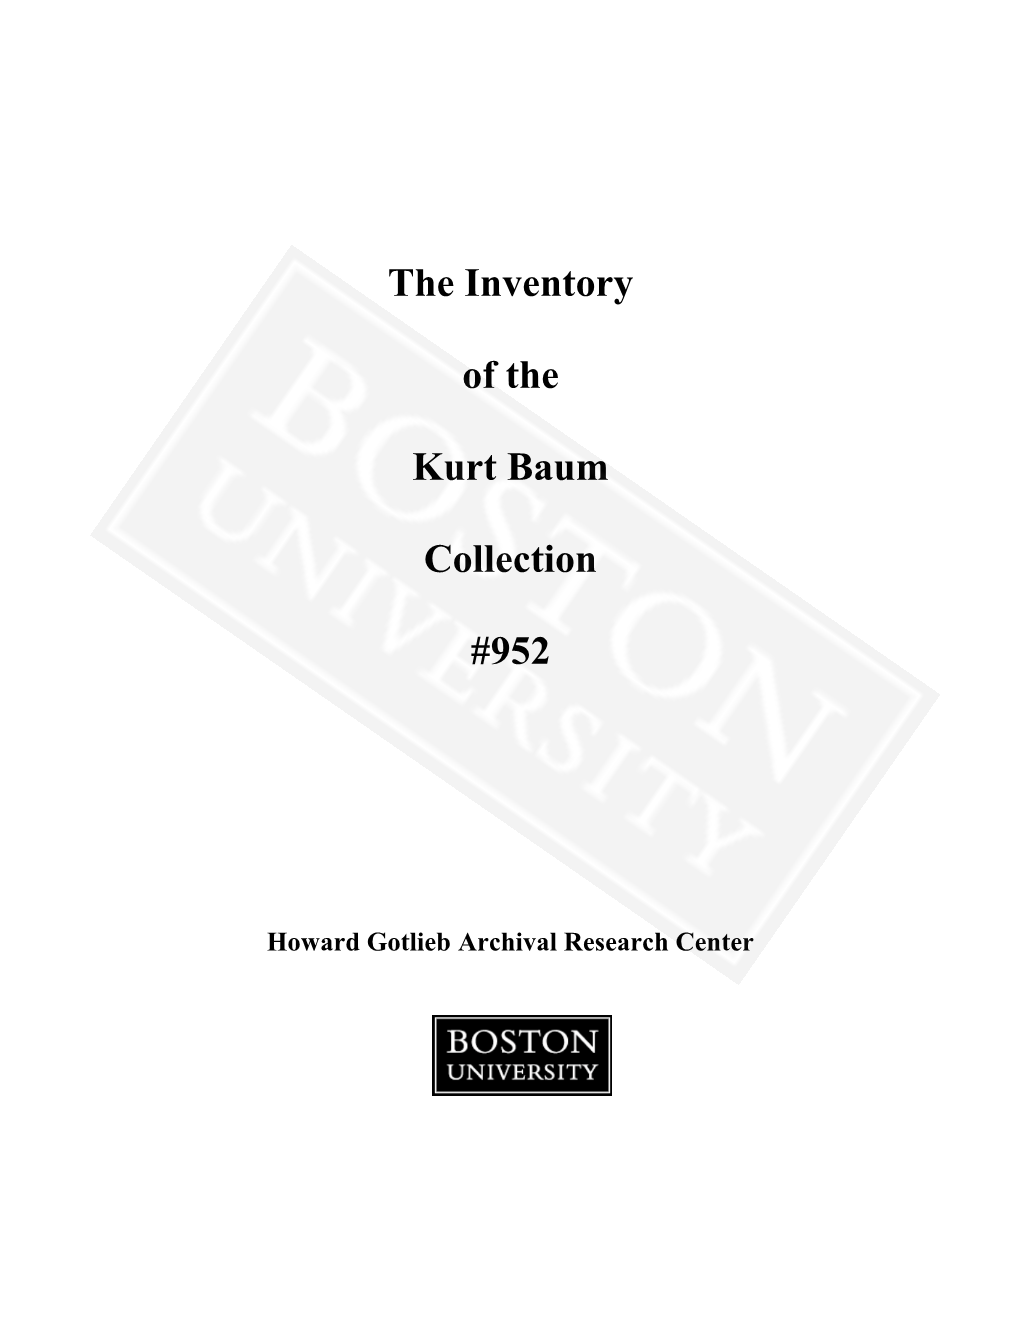 The Inventory of the Kurt Baum Collection #952